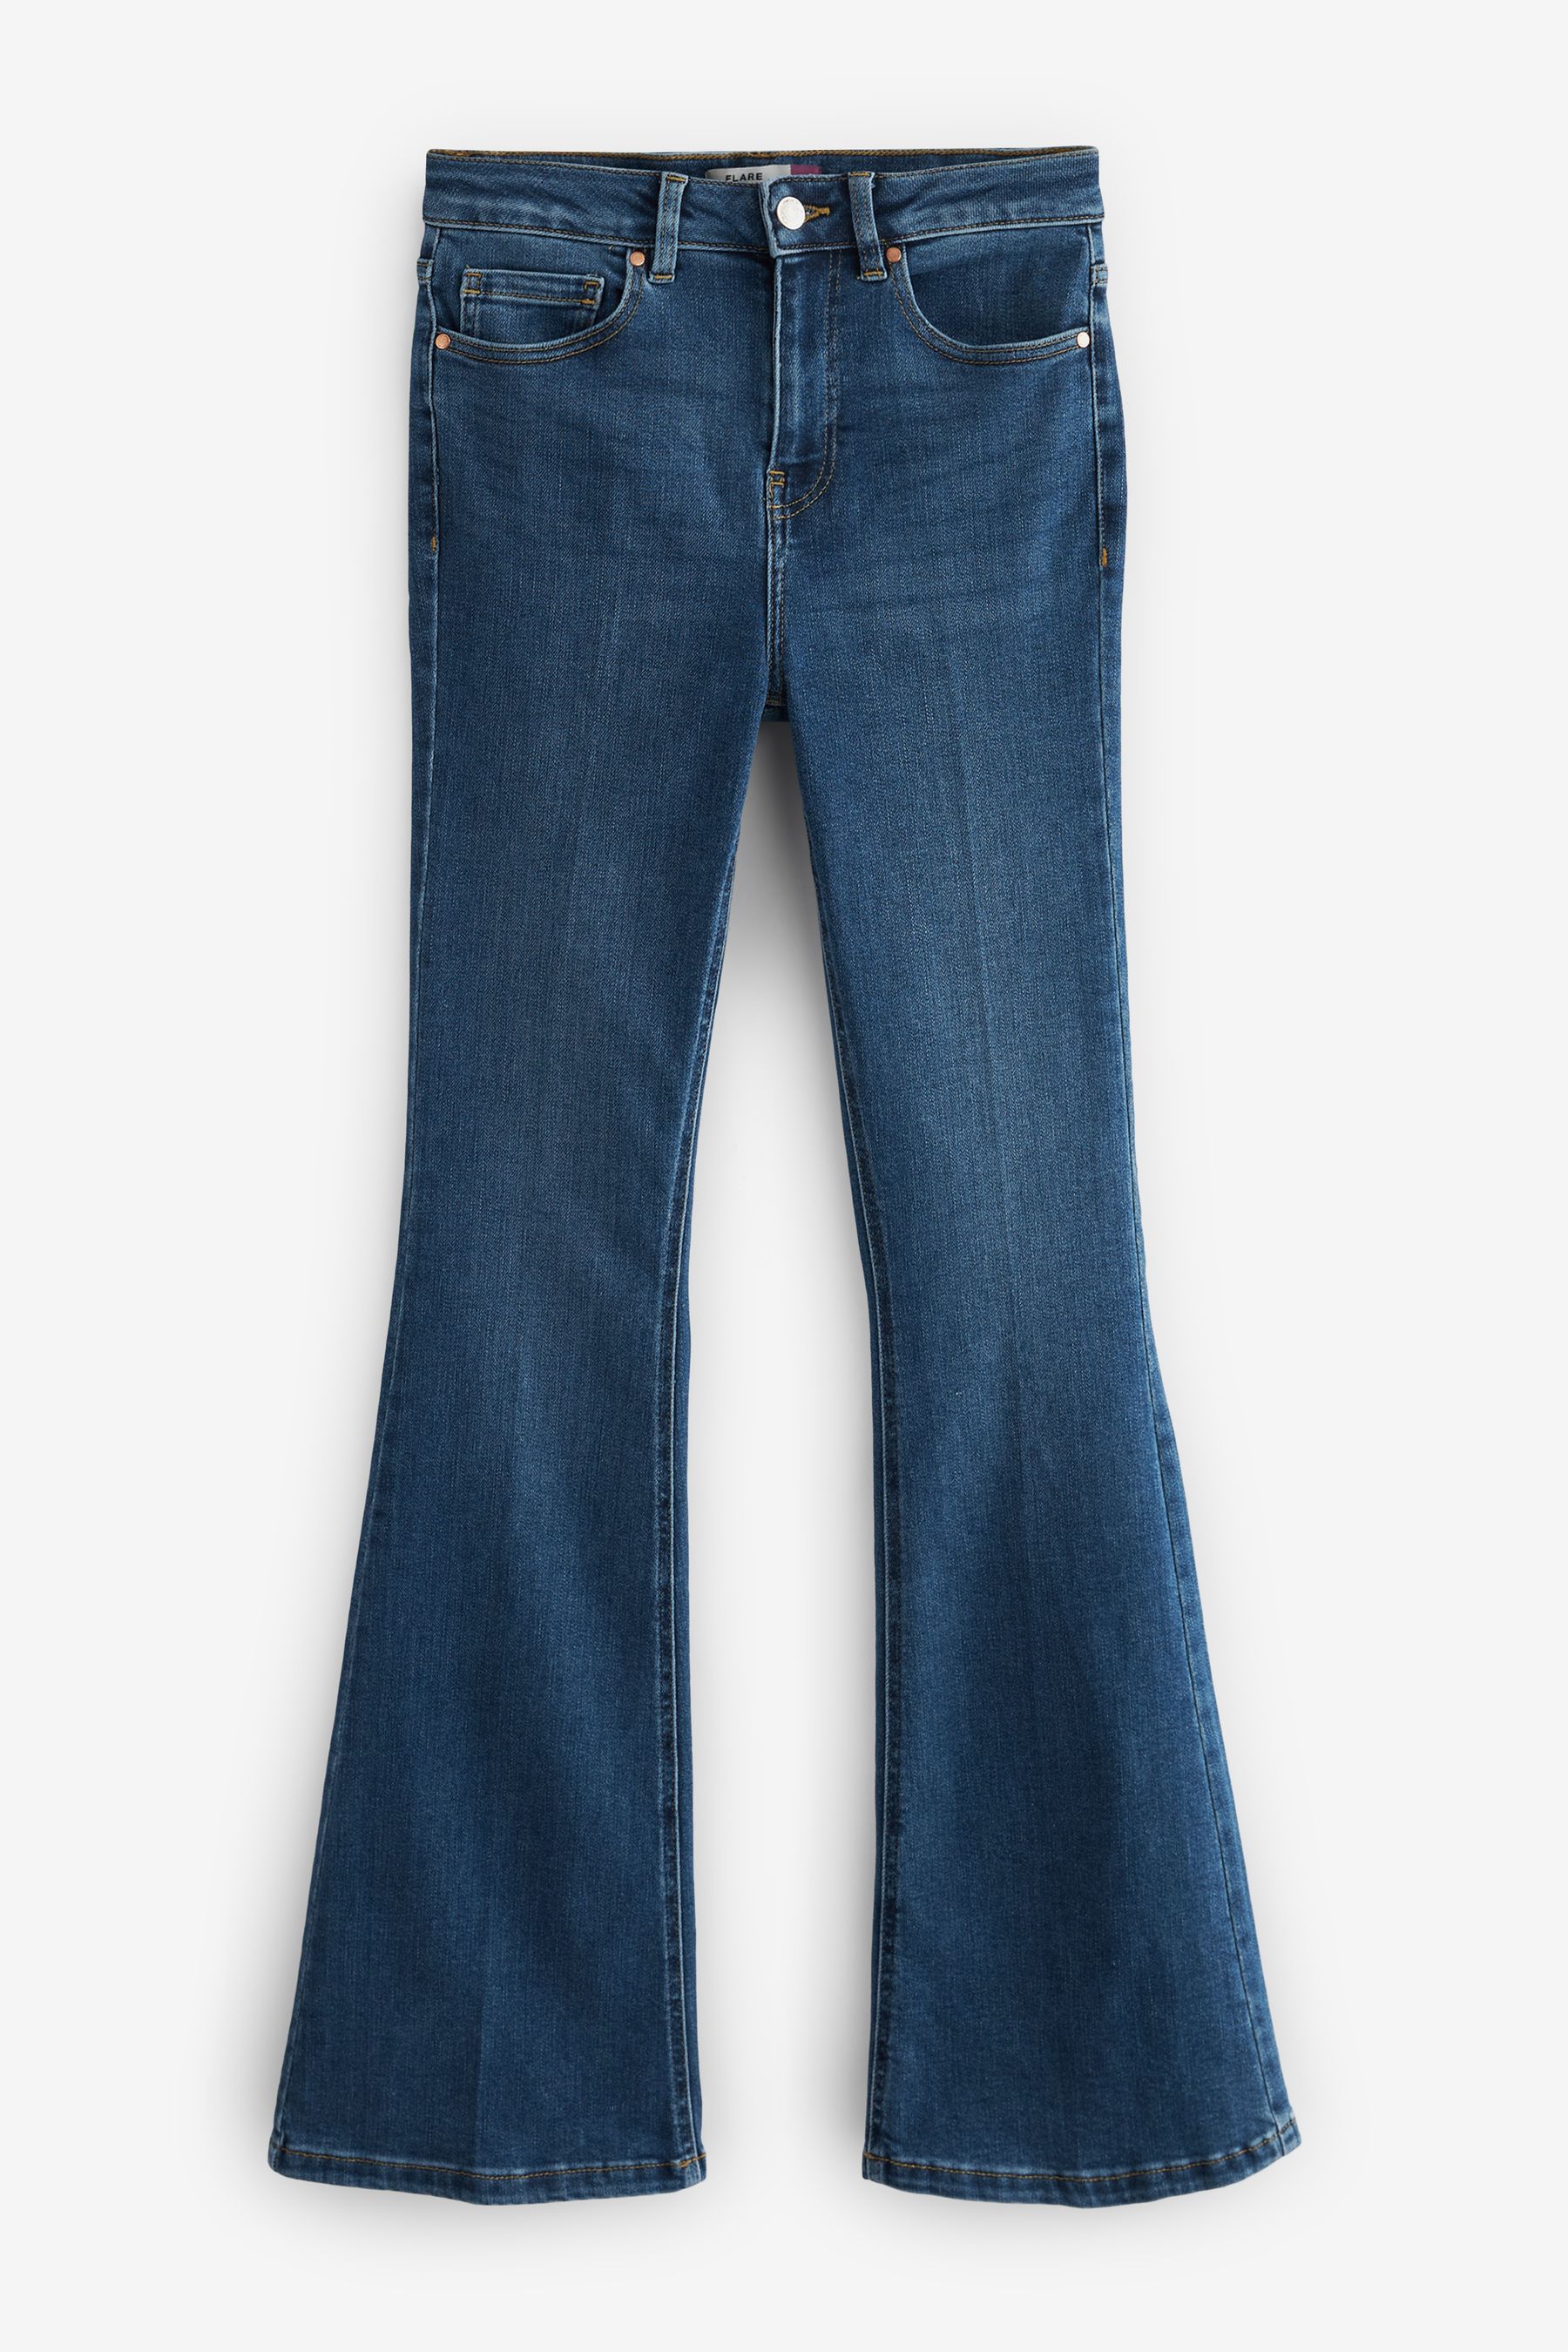 Blue Stretch Flare Jeans